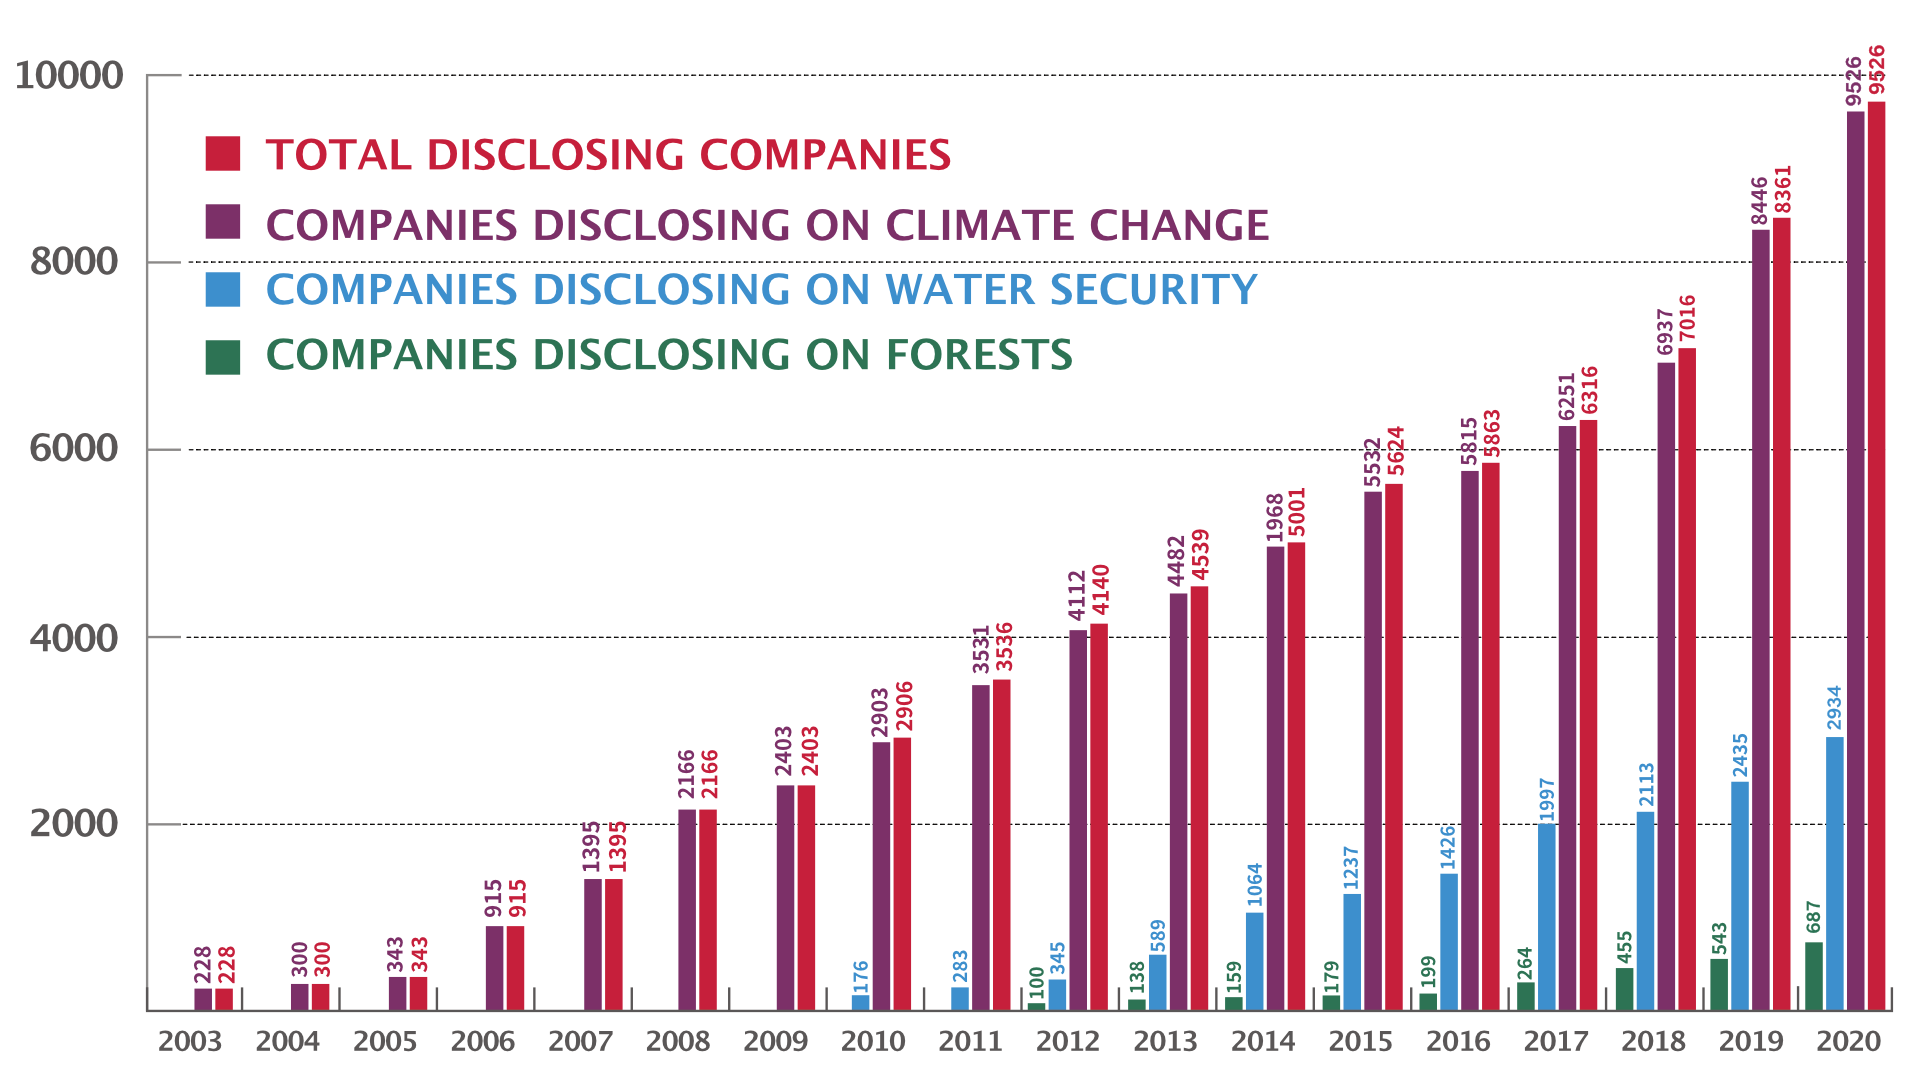 Evolution of coverage. This graph comes from the Carbon Disclosure Project (CDP - https://www.cdp.net). Each year, the CDP gathers information from firms that voluntarily disclose environmental related data. The above plot shows the increase in data inflow (across several topics) experienced by the CDP.